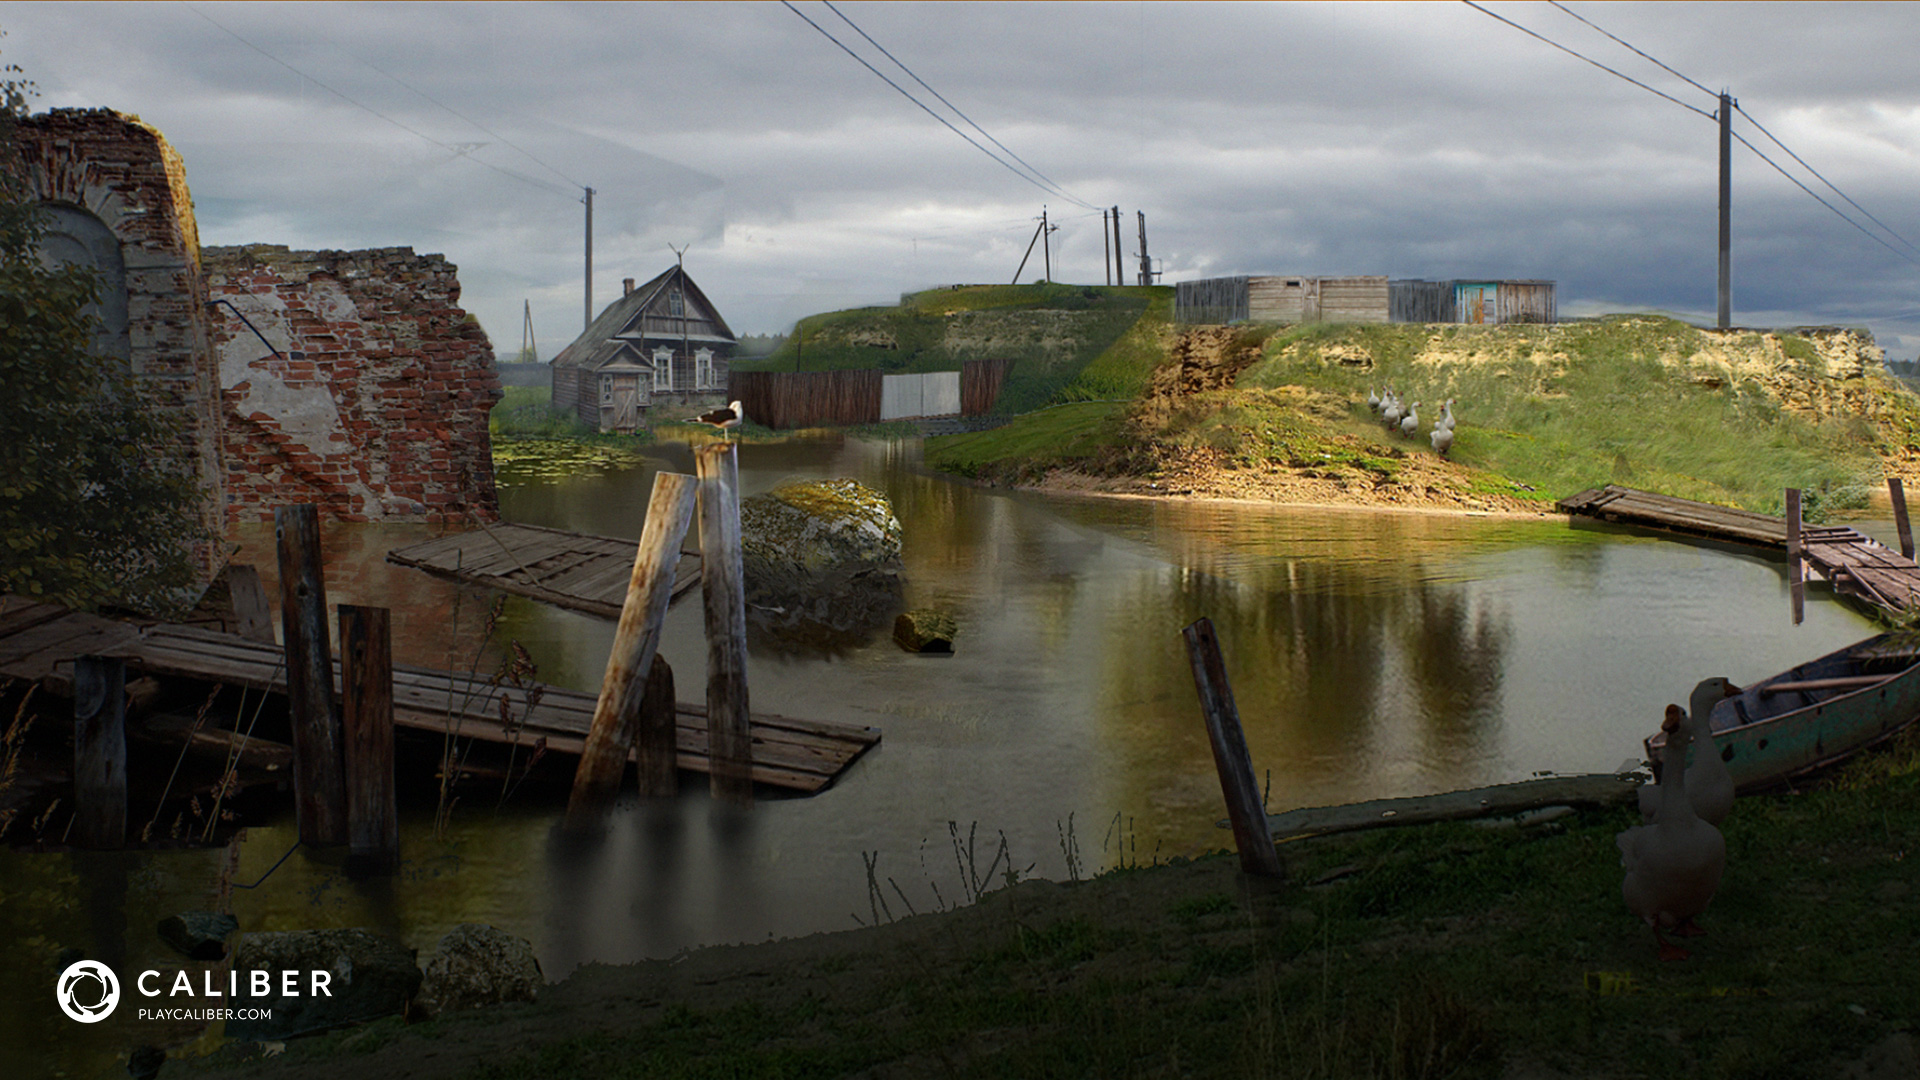 Crossing was referenced from rural landscapes of the central part of Russia.